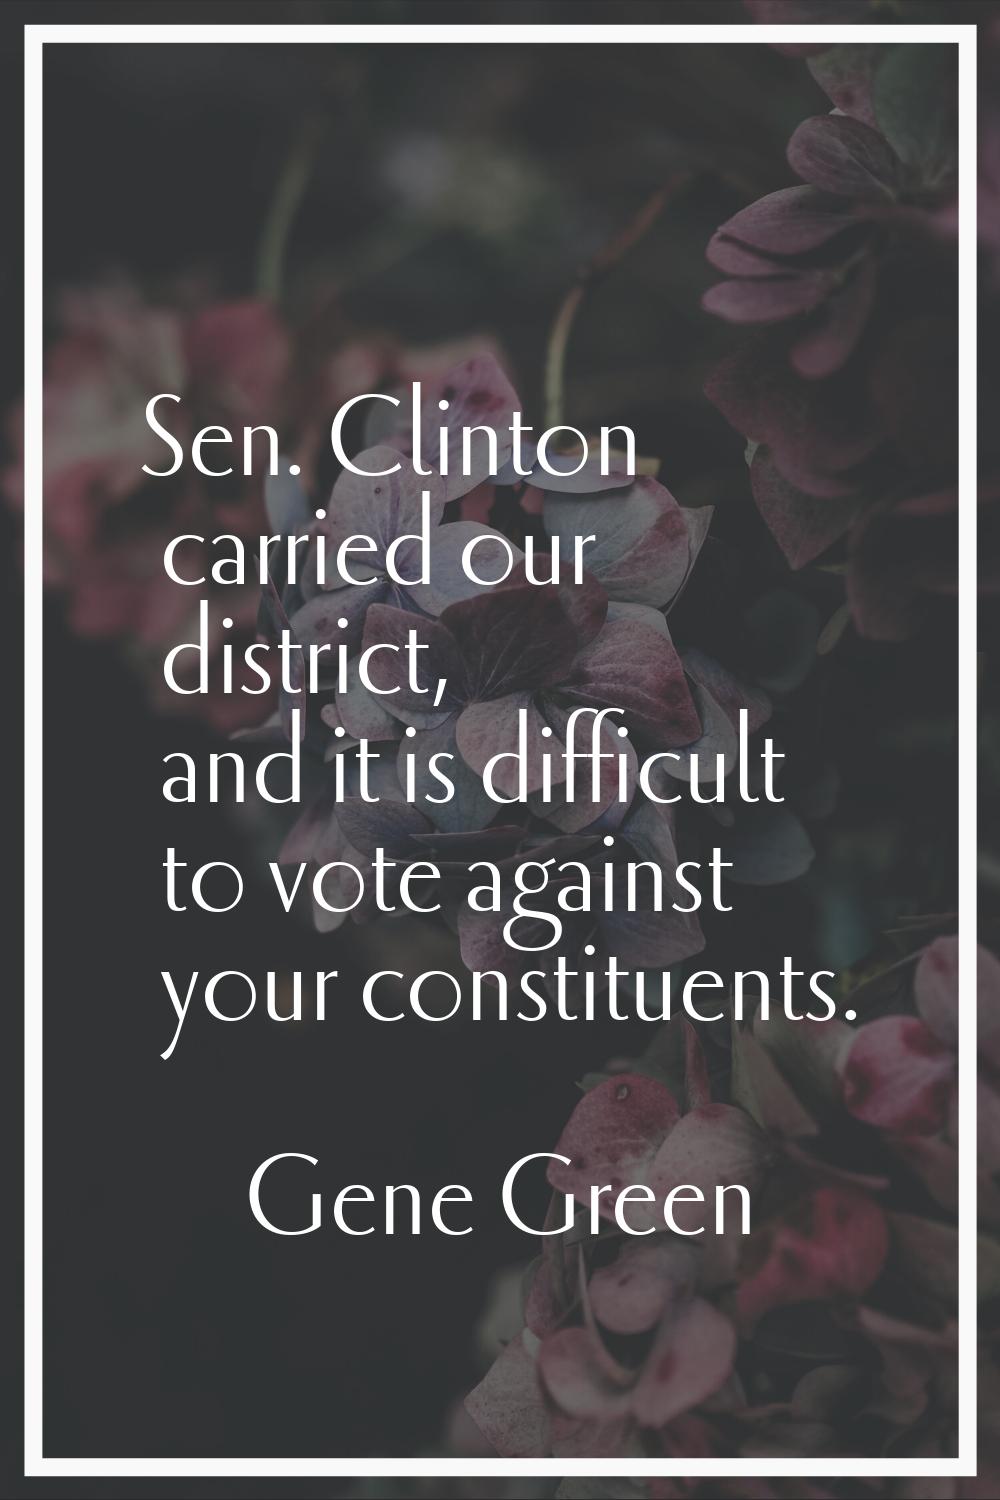 Sen. Clinton carried our district, and it is difficult to vote against your constituents.